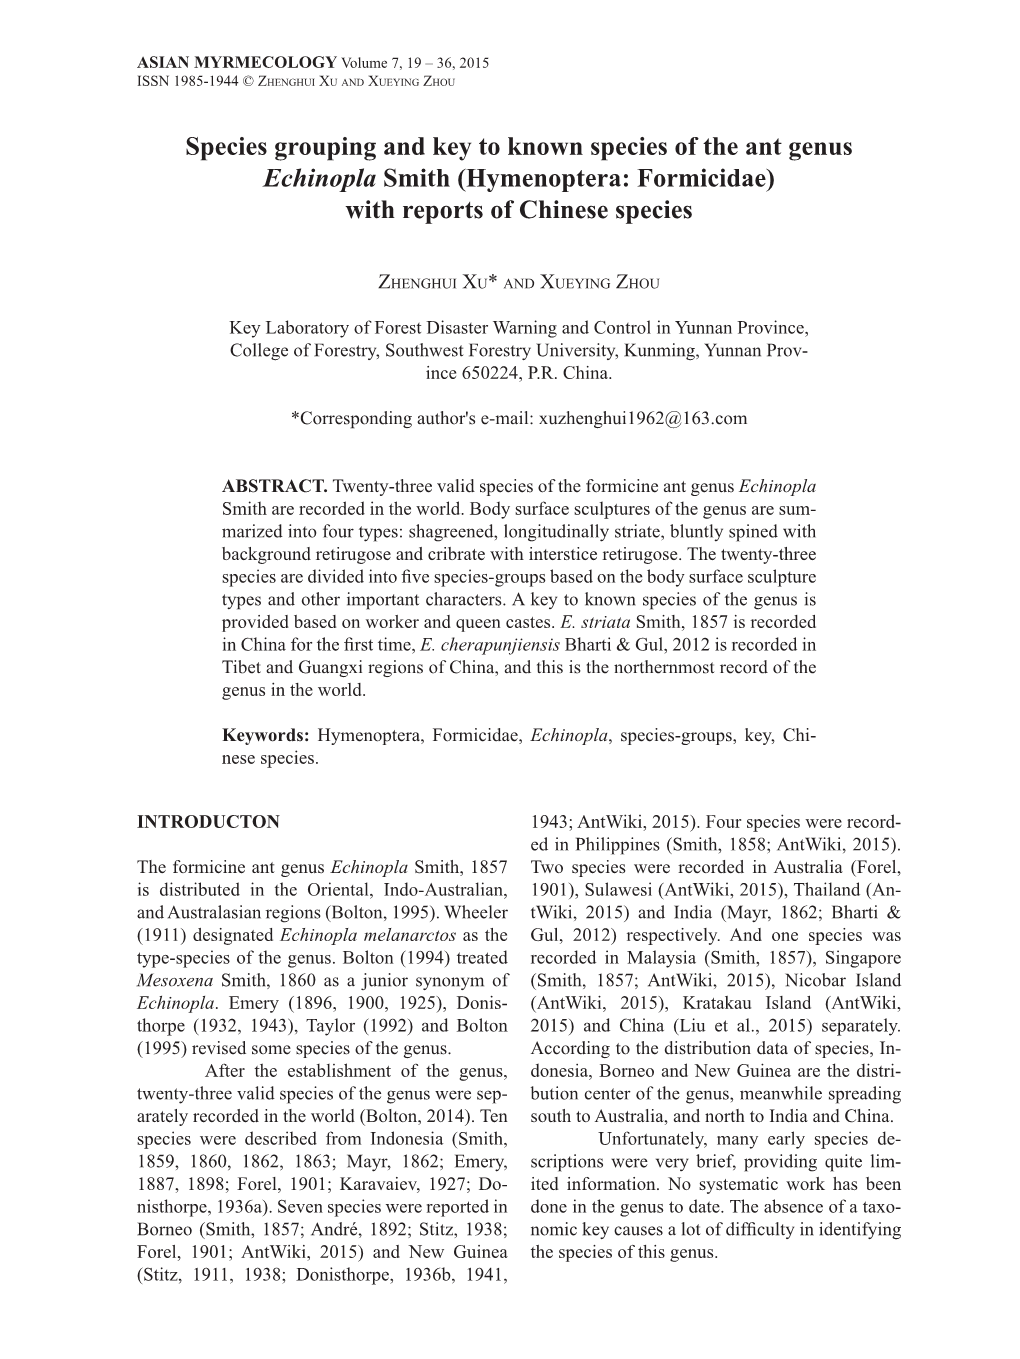 Species Grouping and Key to Known Species of the Ant Genus Echinopla Smith (Hymenoptera: Formicidae) with Reports of Chinese Species